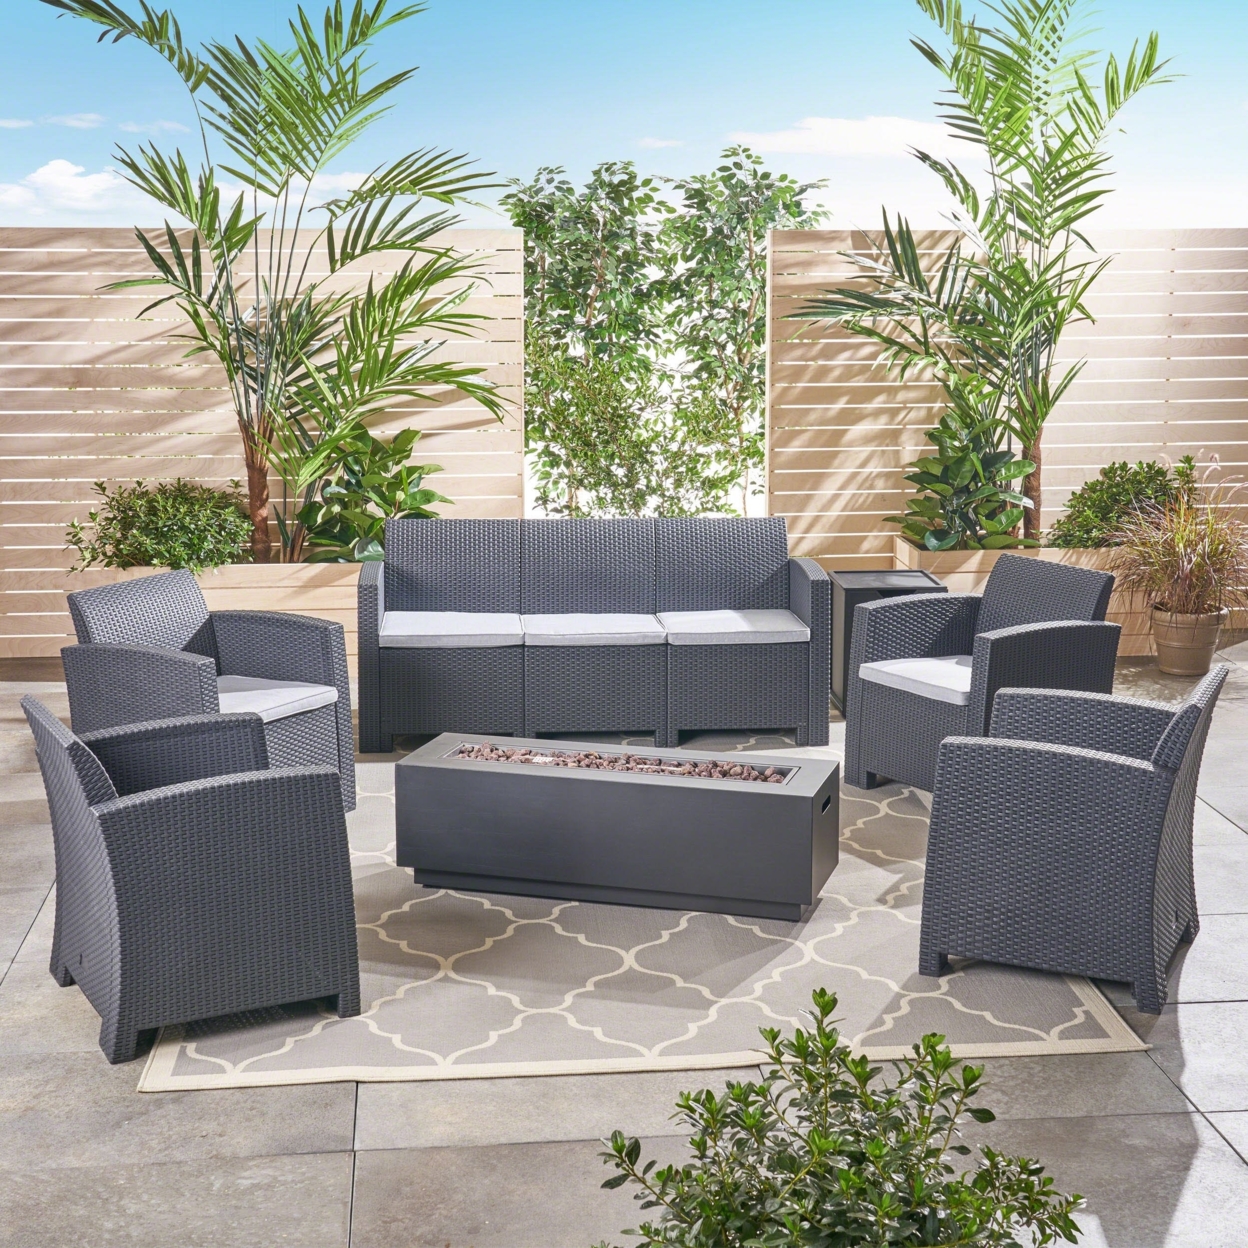 Great Deal Furniture Dane Outdoor 7-Seater Wicker Print Chat Set With Fire Pit And Tank Holder, Charcoal With Light Gray And Dark Gray